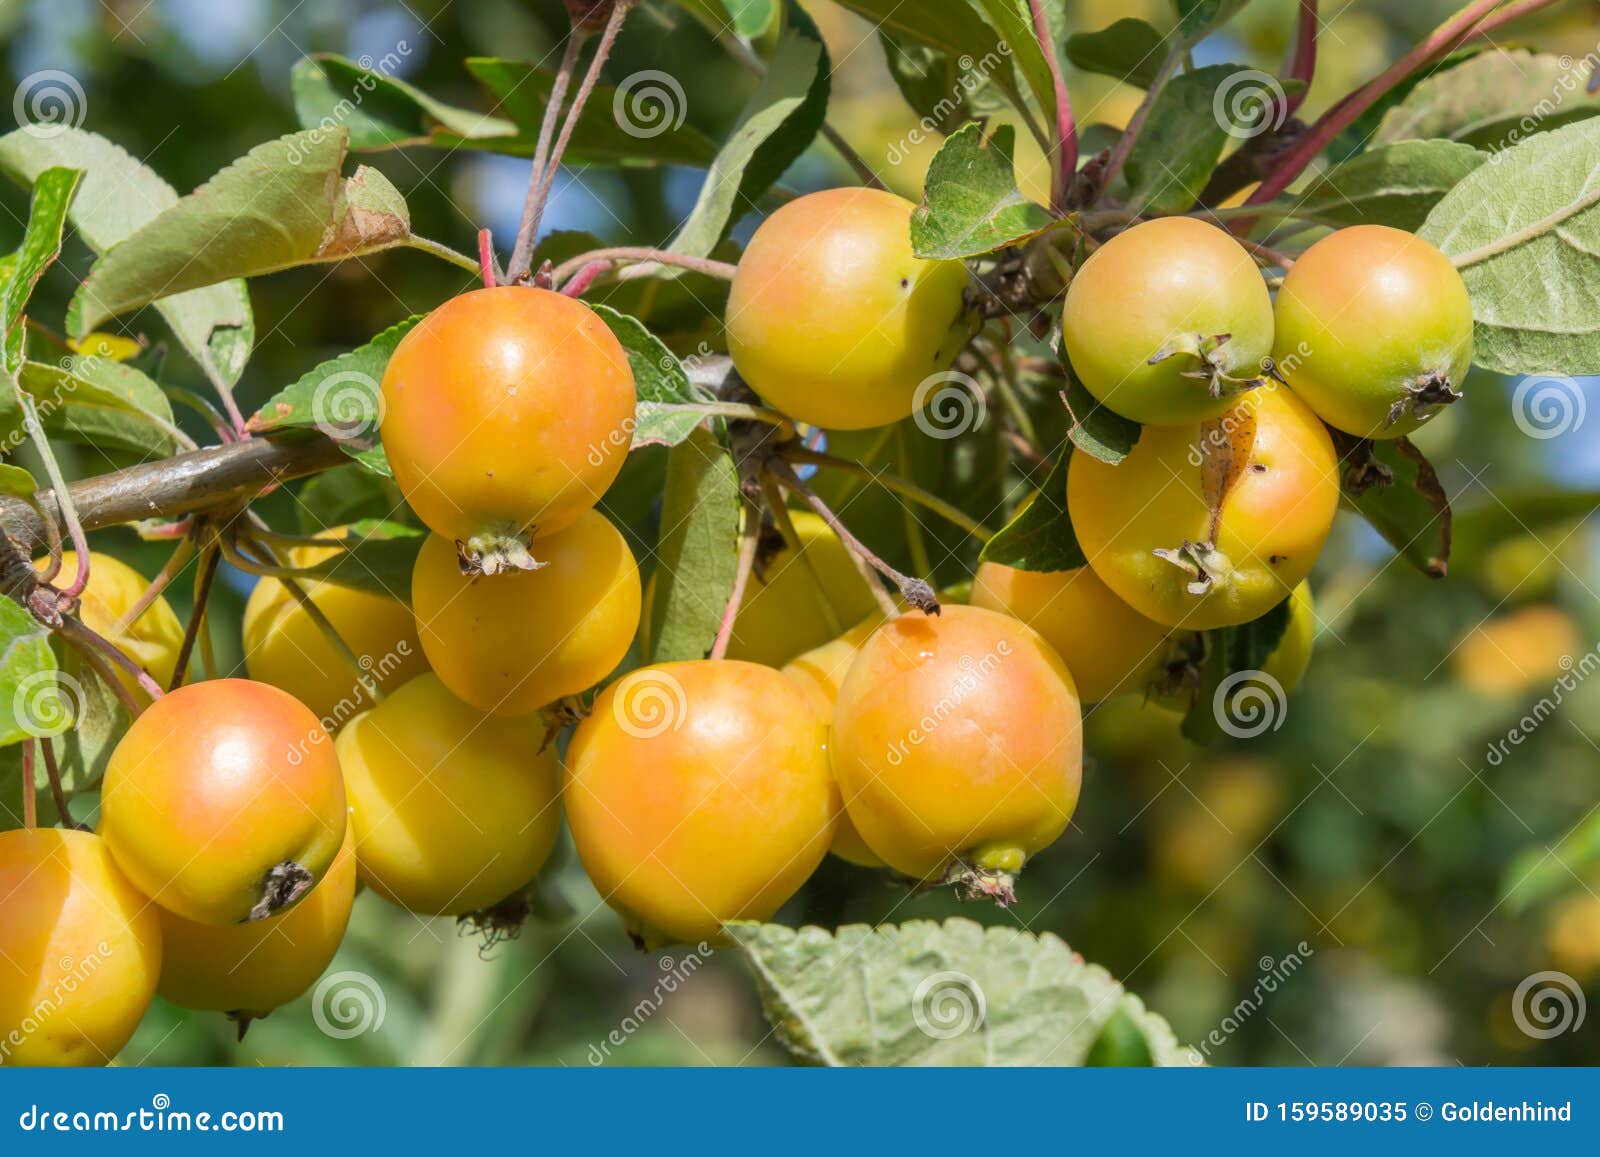 The Branch Of Malus Baccata Or Siberian Crab Apple Tree With Tiny Red And Orange Cherry Apples Stock Image Image Of Winter Nature 159589035 - roblox malus map download